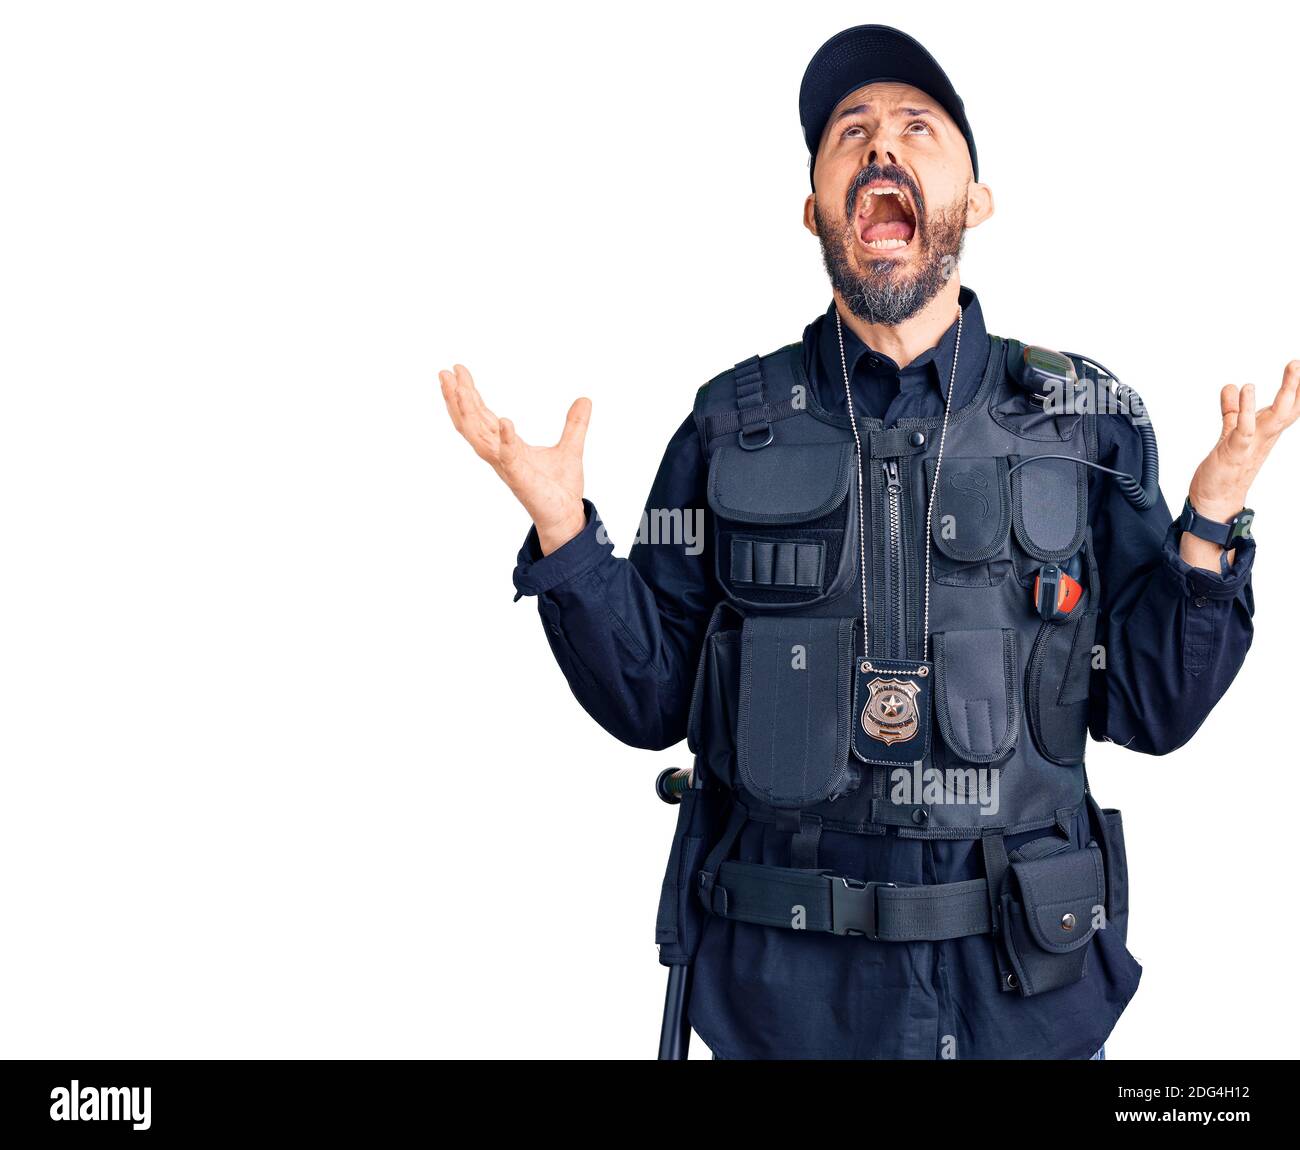 Young handsome man wearing police uniform crazy and mad shouting and yelling with aggressive expression and arms raised. frustration concept. Stock Photo